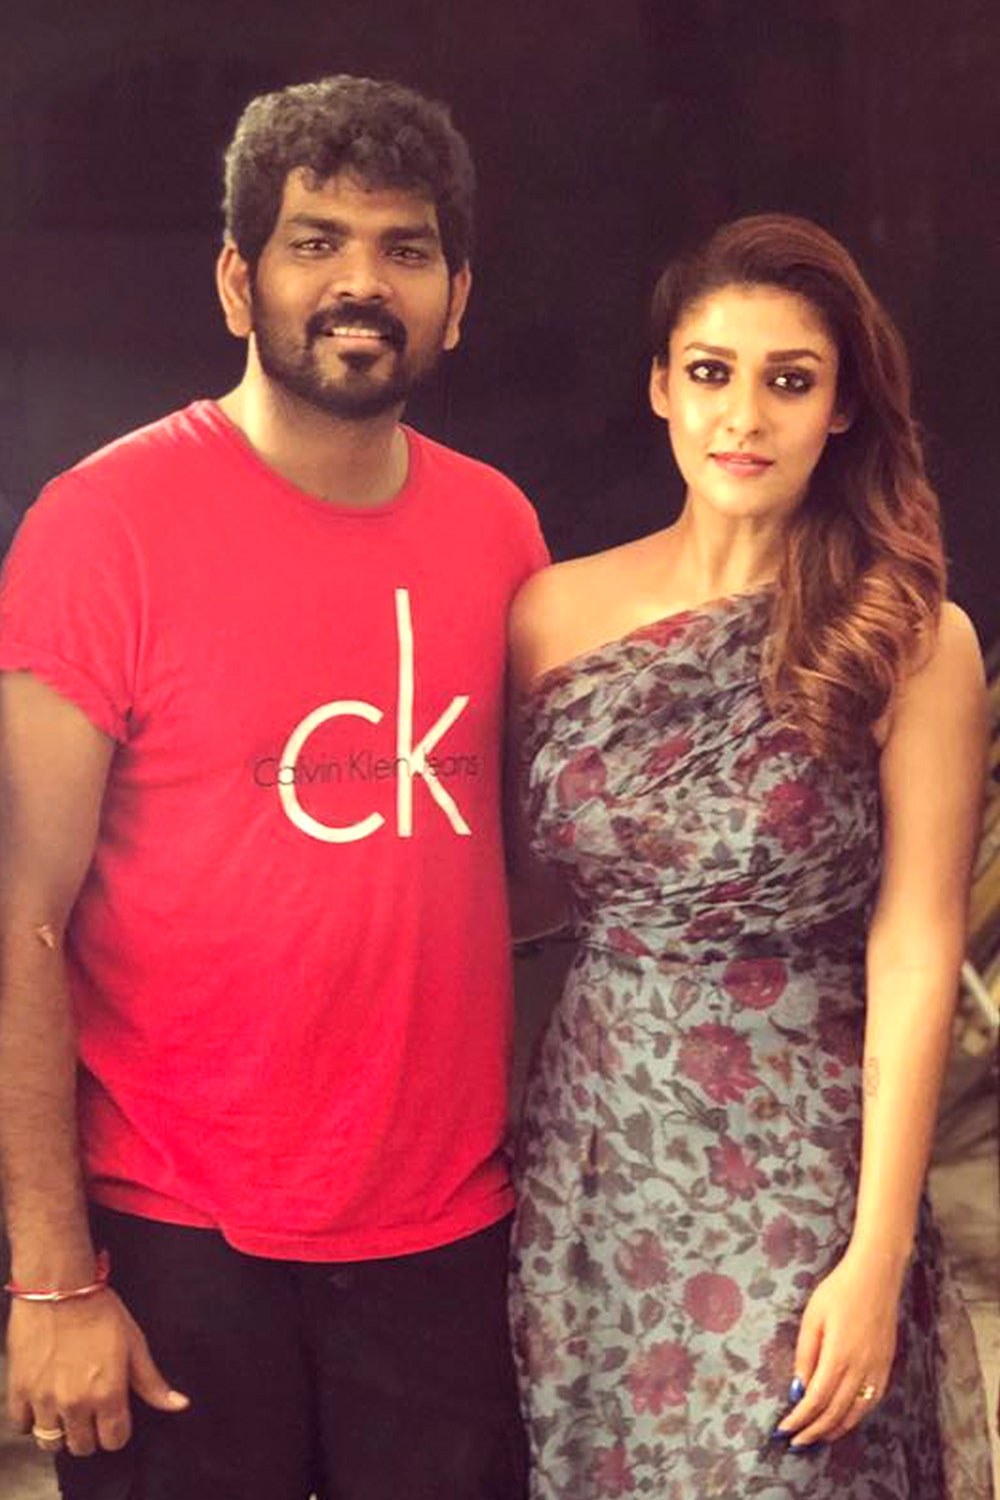 Nayanthara unseen image released by vignesh shivan